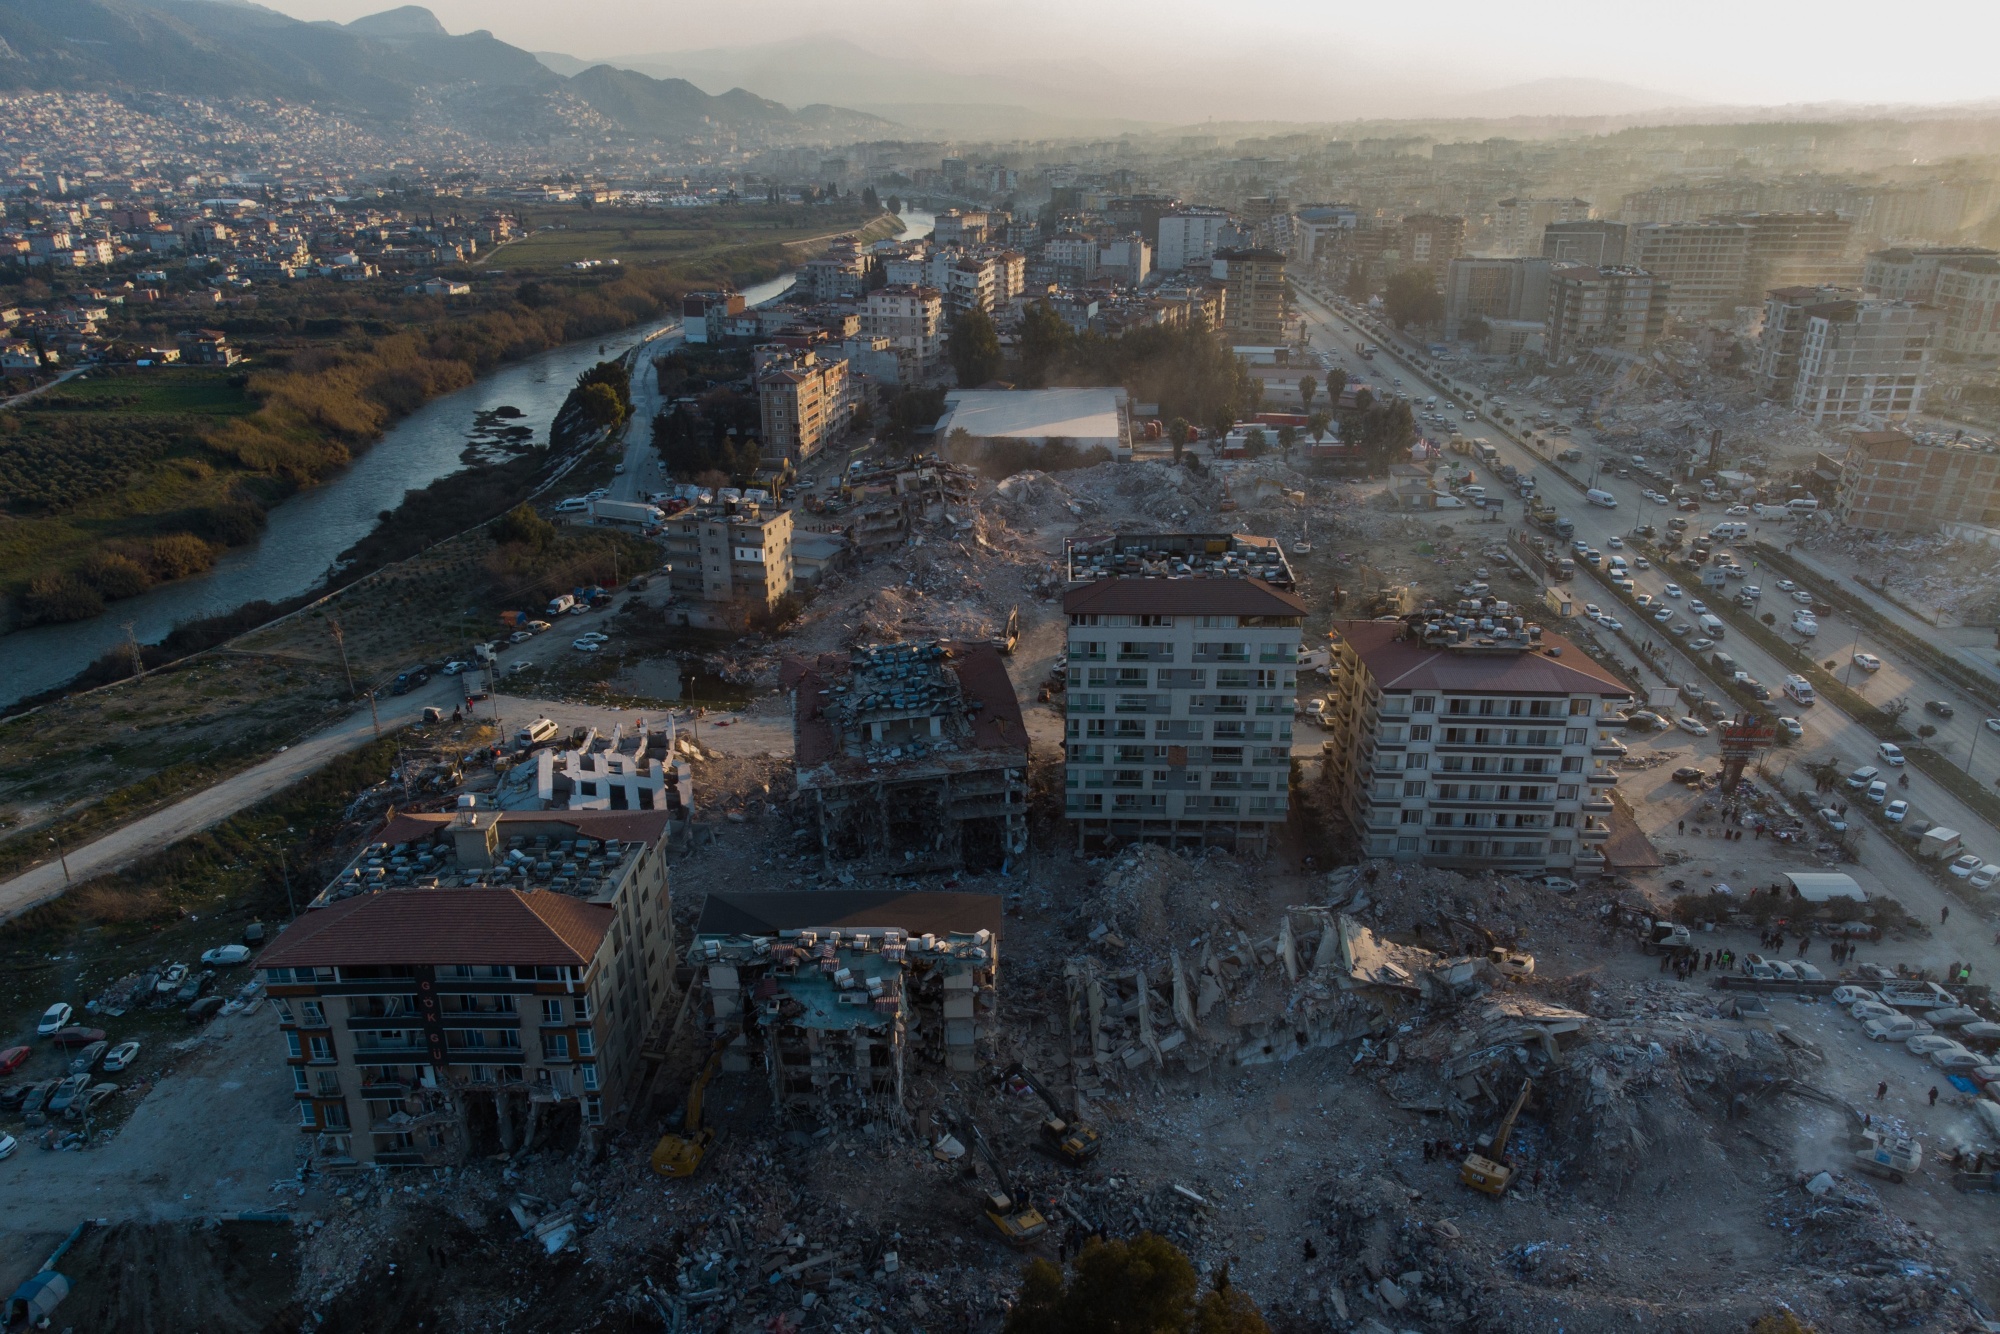 Collapsed and damaged residential buildings in Hatay, Turkey on Feb. 13.